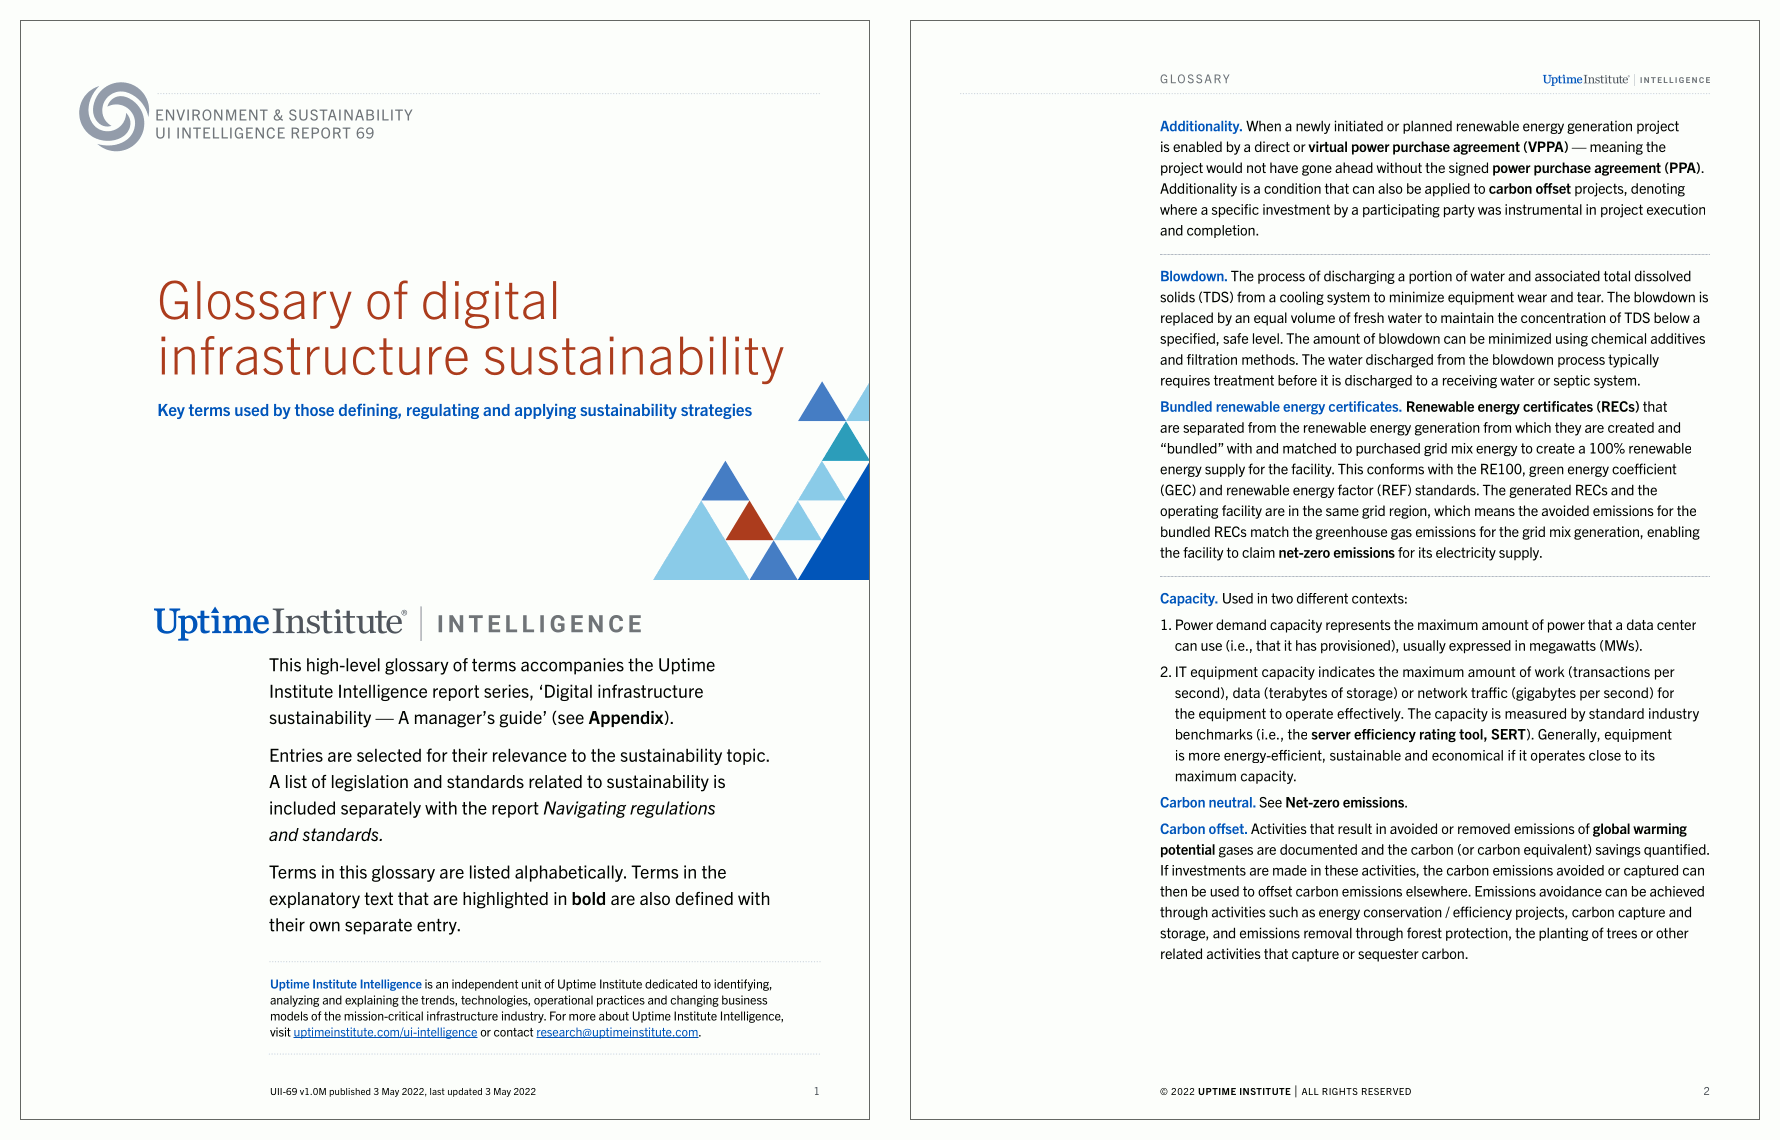 uptime-institute-intelligence_glossary-of-digital-infrastructure-sustainability_v4p_preview.gif